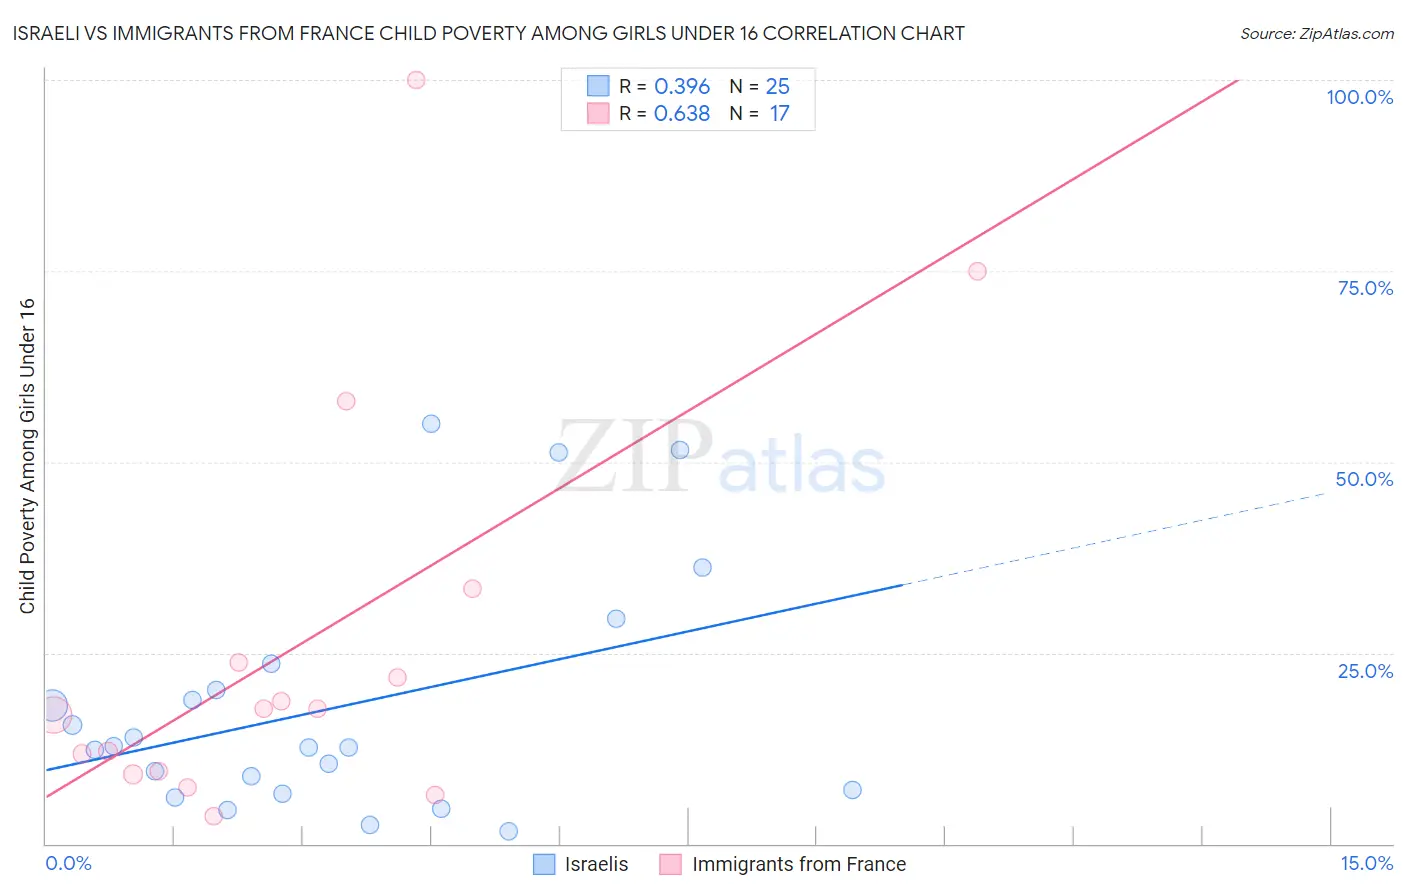 Israeli vs Immigrants from France Child Poverty Among Girls Under 16